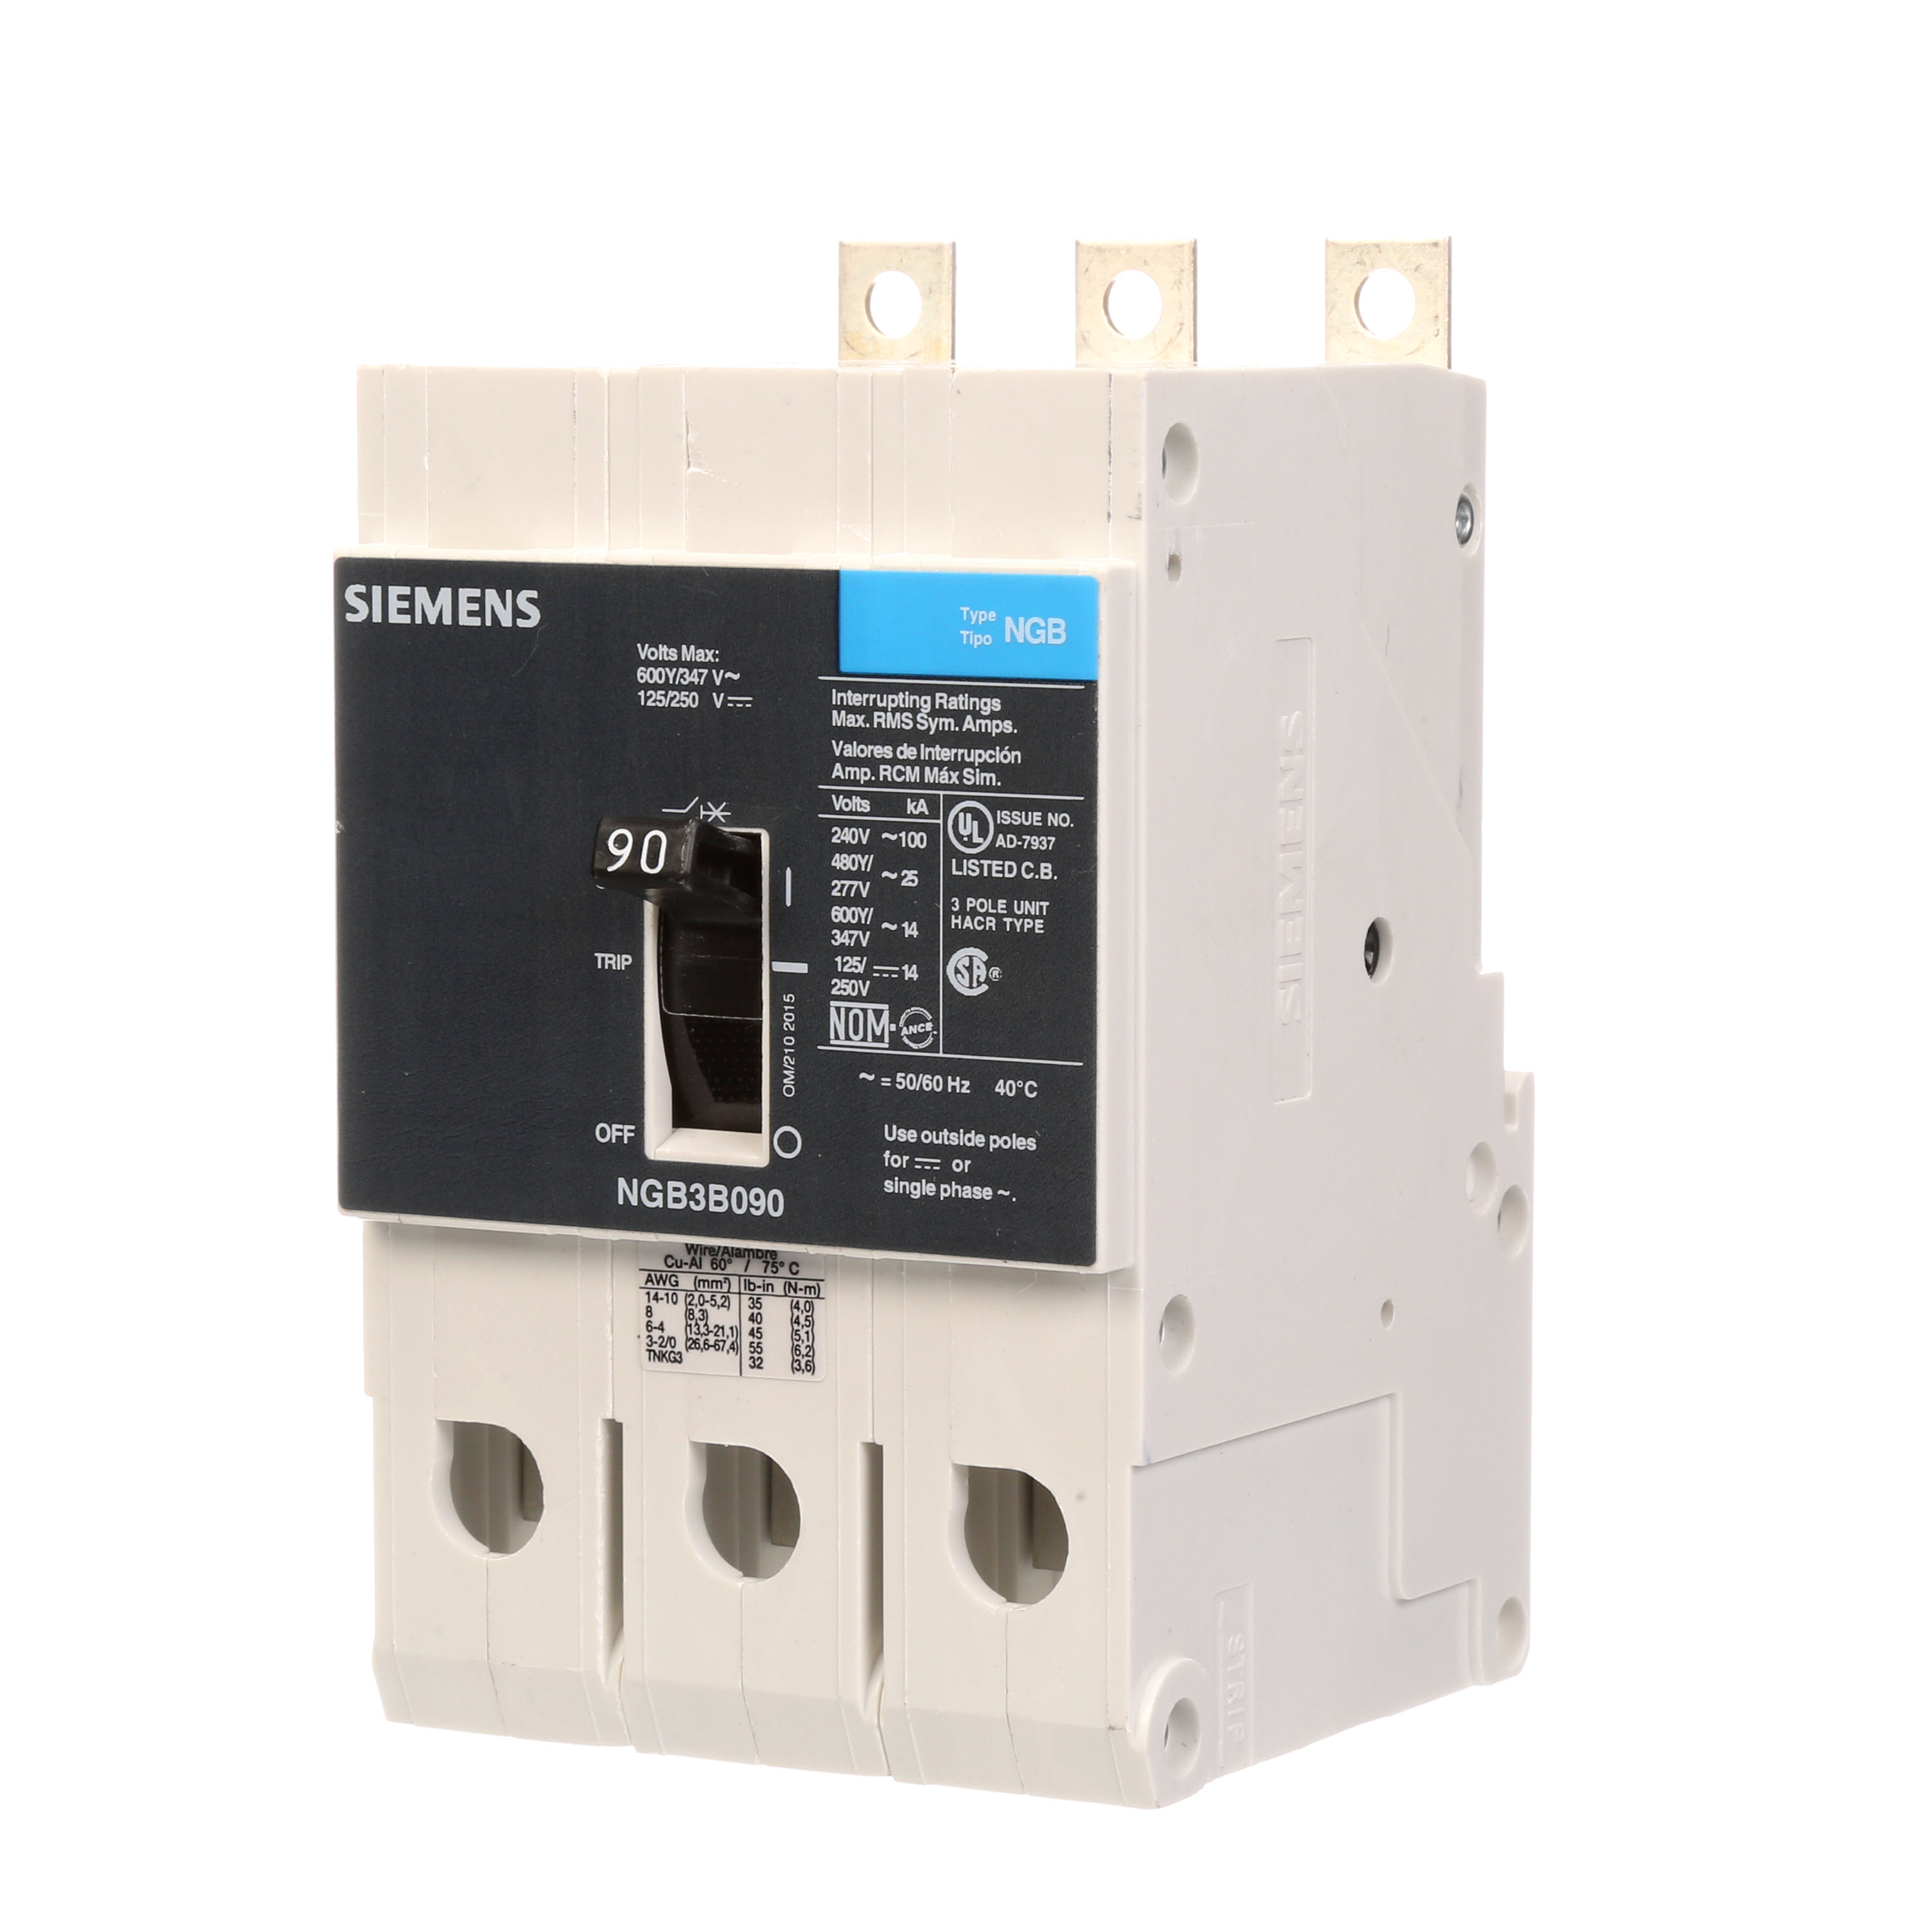 SIEMENS LOW VOLTAGE PANELBOARD MOUNT G FRAME CIRCUIT BREAKER WITH THERMAL - MAGNETIC TRIP. UL LISTED NGB FRAME WITH STANDARD BREAKING CAPACITY. 90A 3-POLE (14KAIC AT 600Y/347V) (25KAIC AT 480Y/277V). SPECIAL FEATURES MOUNTS ON PANELBOARD, NO LUGS, VALUE PACK. DIMENSIONS (W x H x D) IN 3 x 5.4 x 2.8.